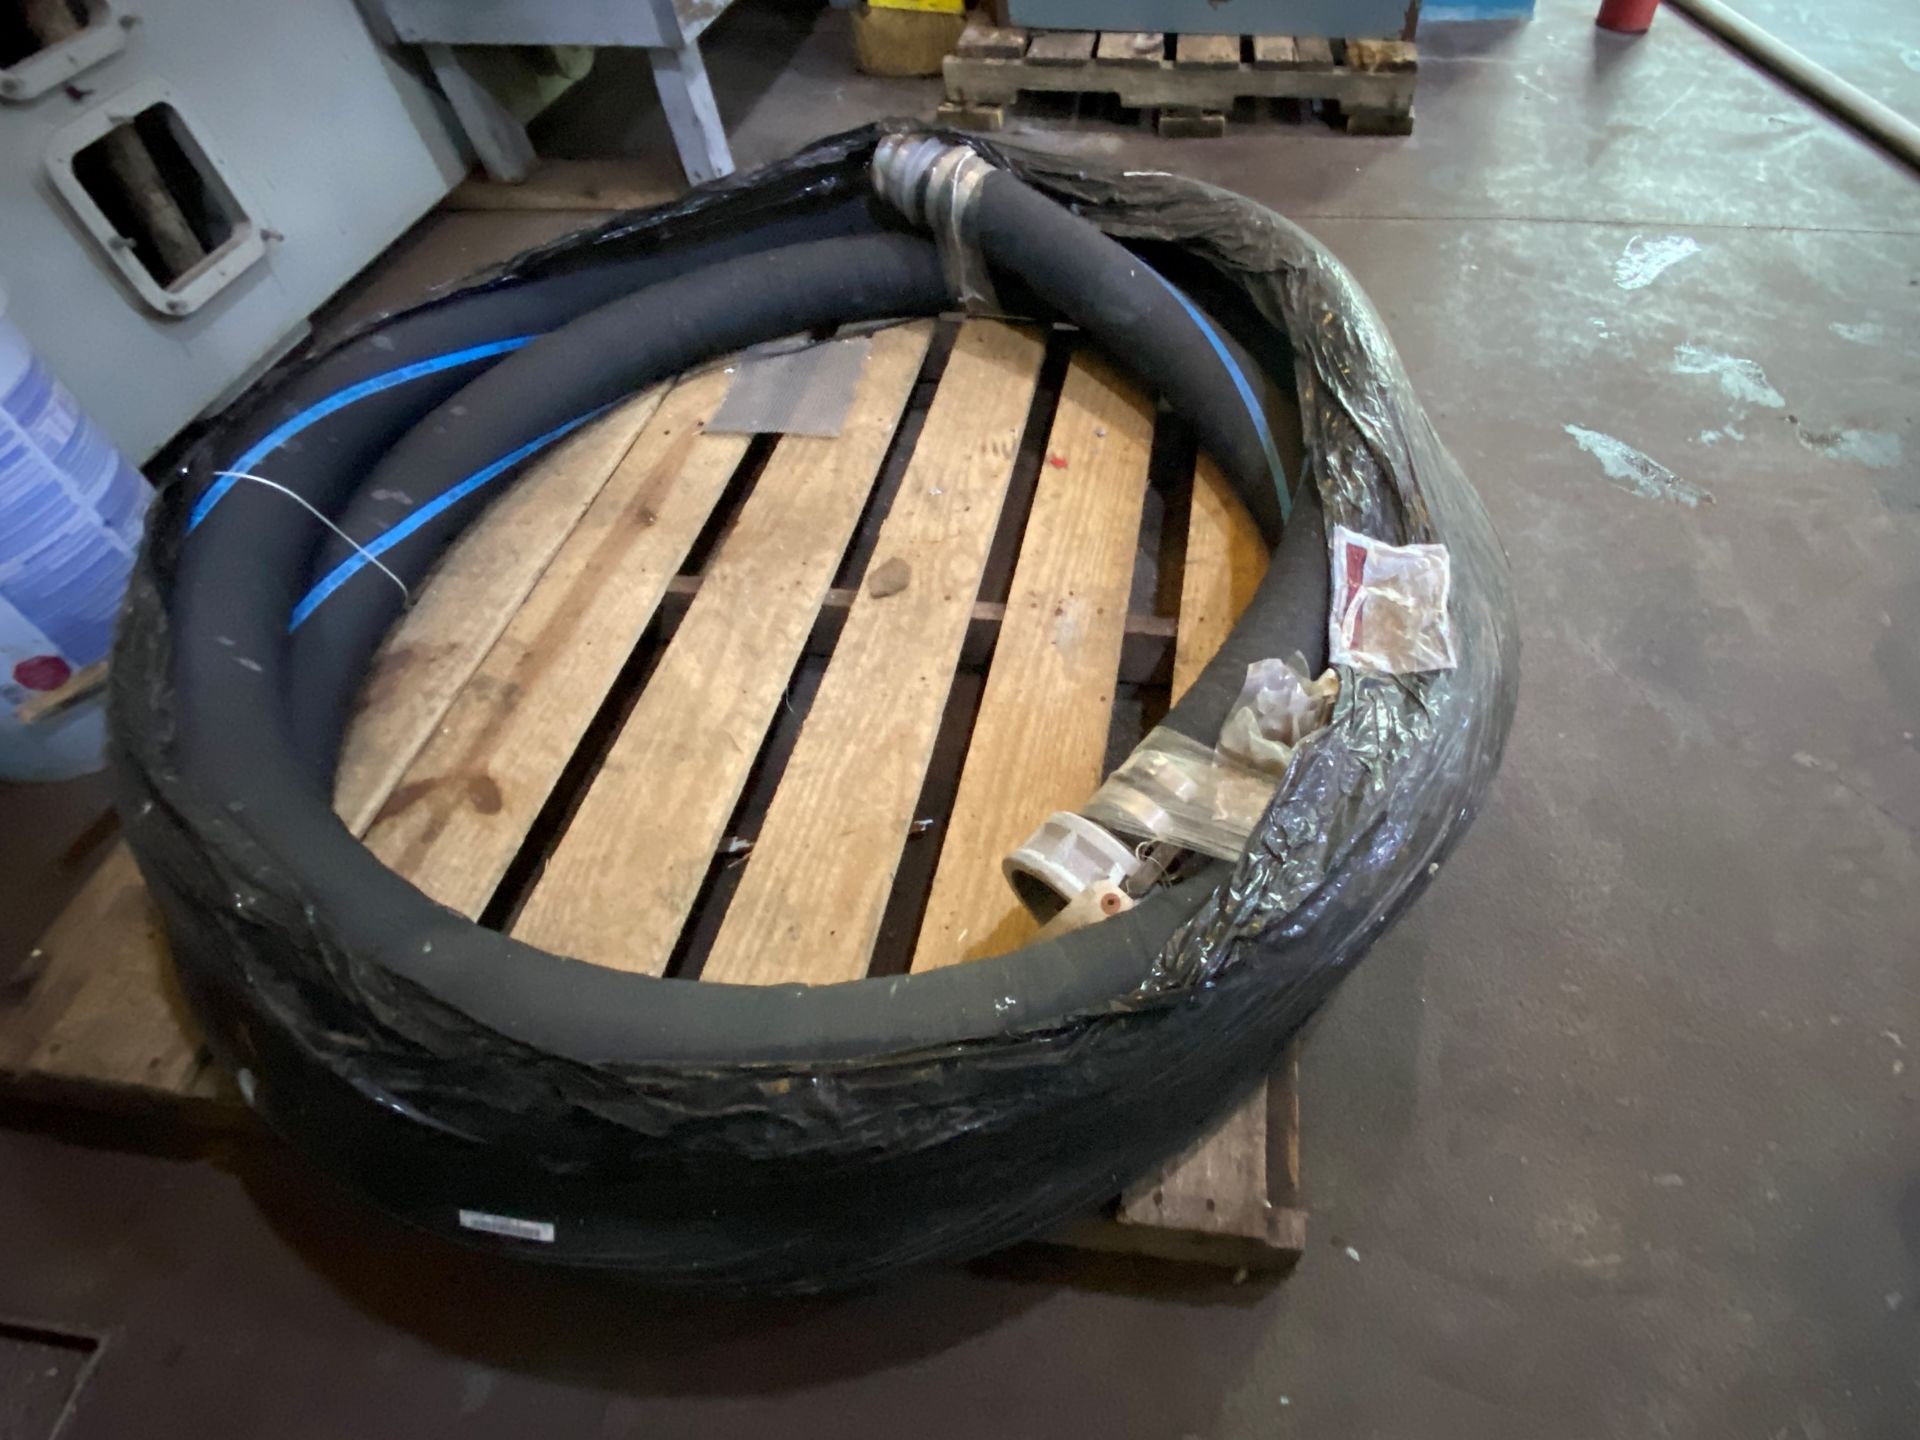 10' X 3" HP rubber high pressure hose on pallet with quick connect fittings